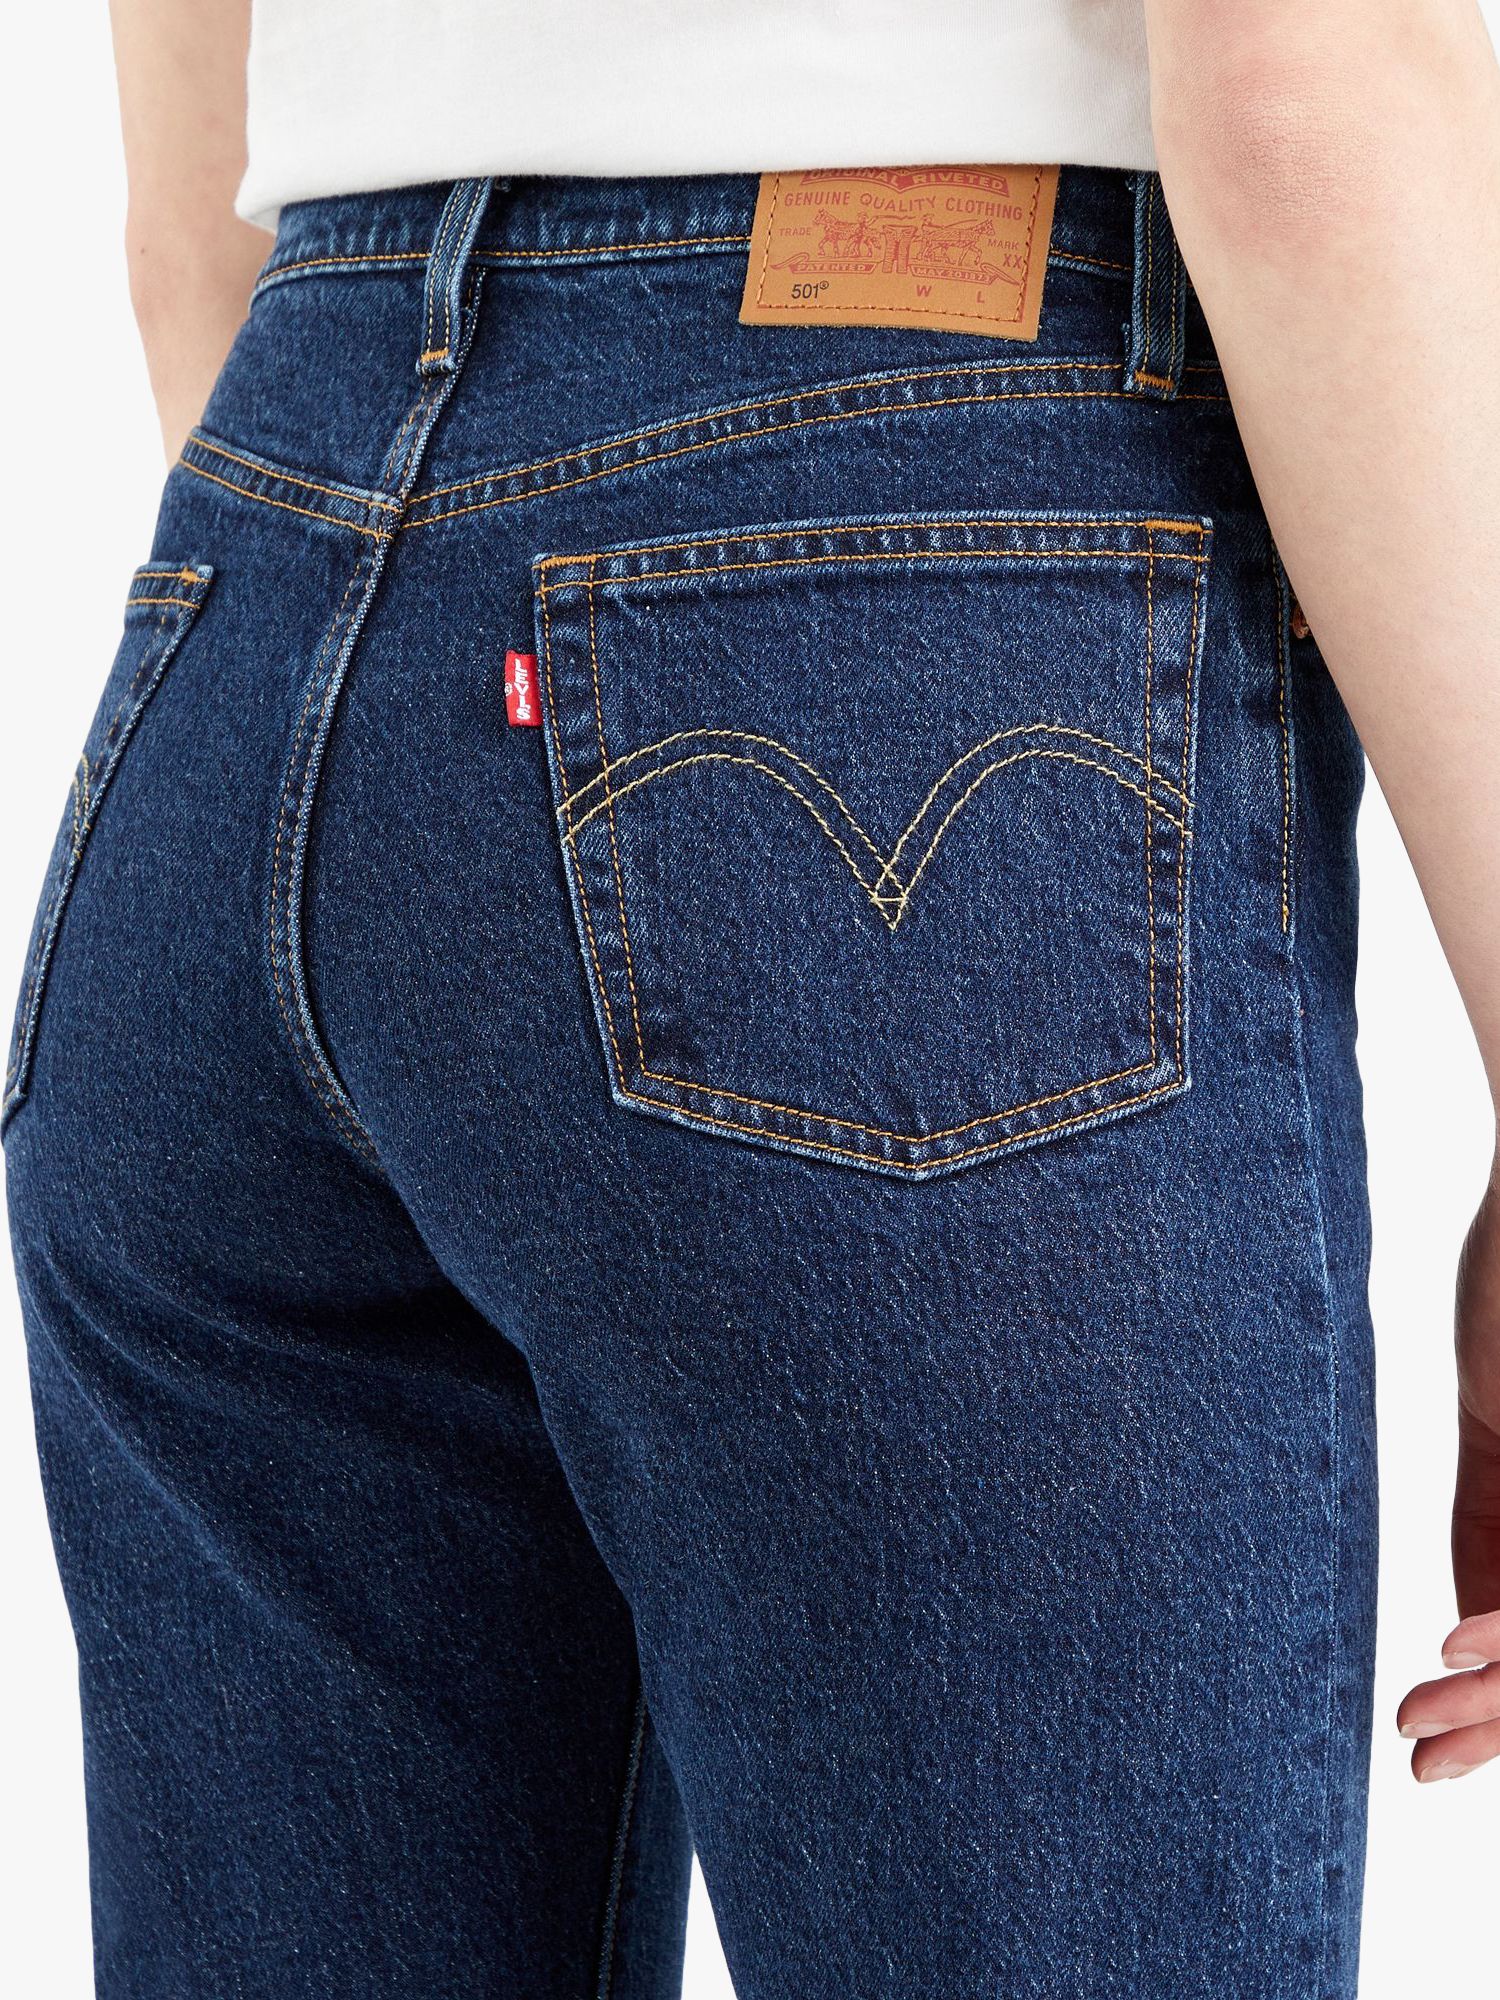 Levis 501 Cropped Jeans Salsa Stonewash At John Lewis And Partners 